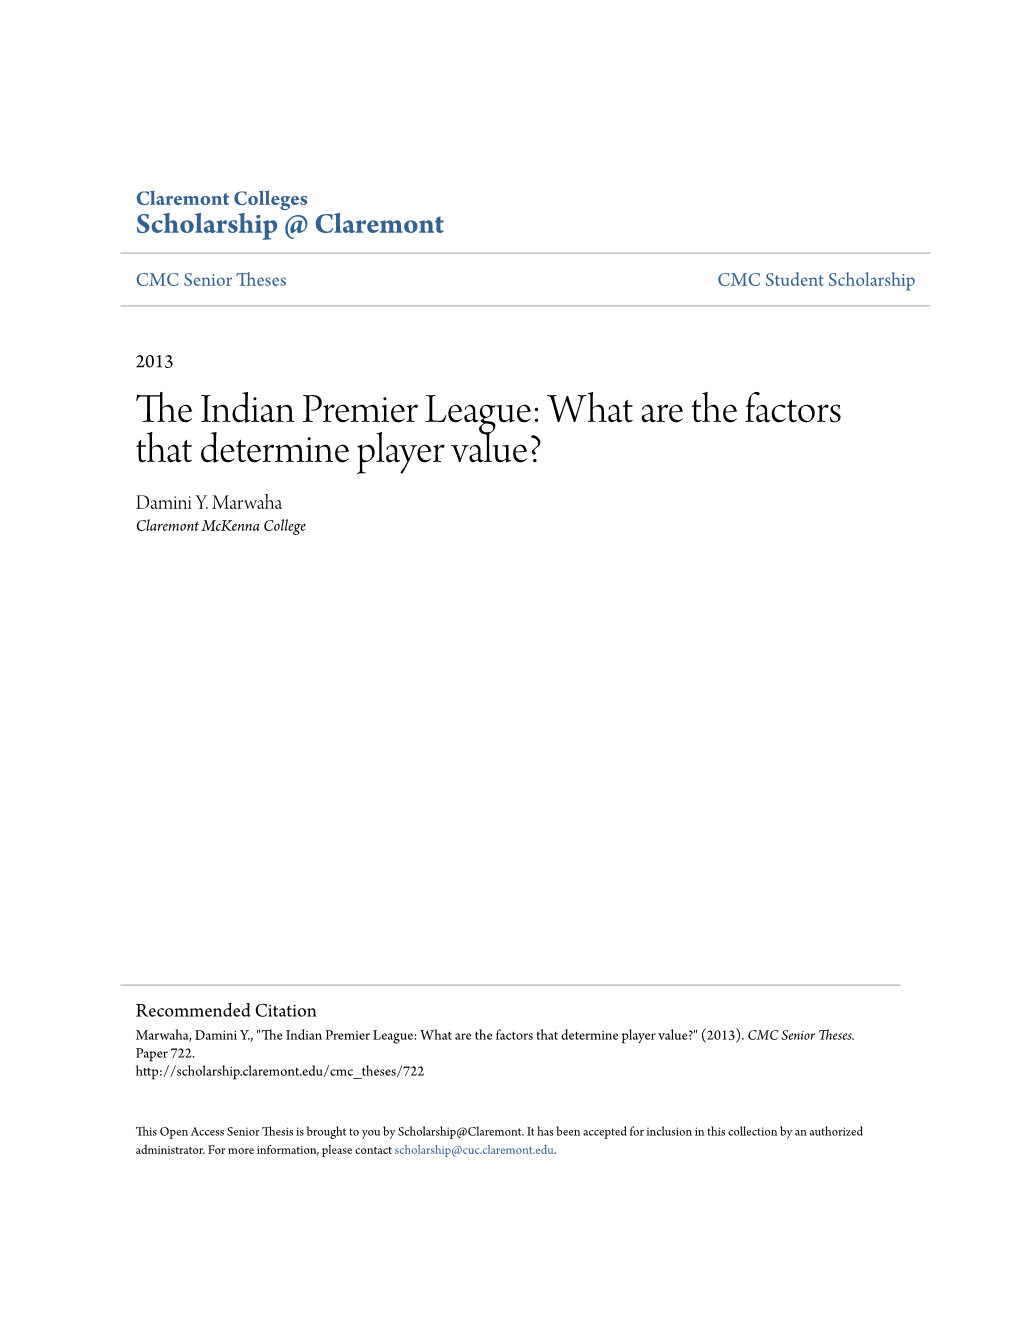 The Indian Premier League: What Are the Factors That Determine Player Value?